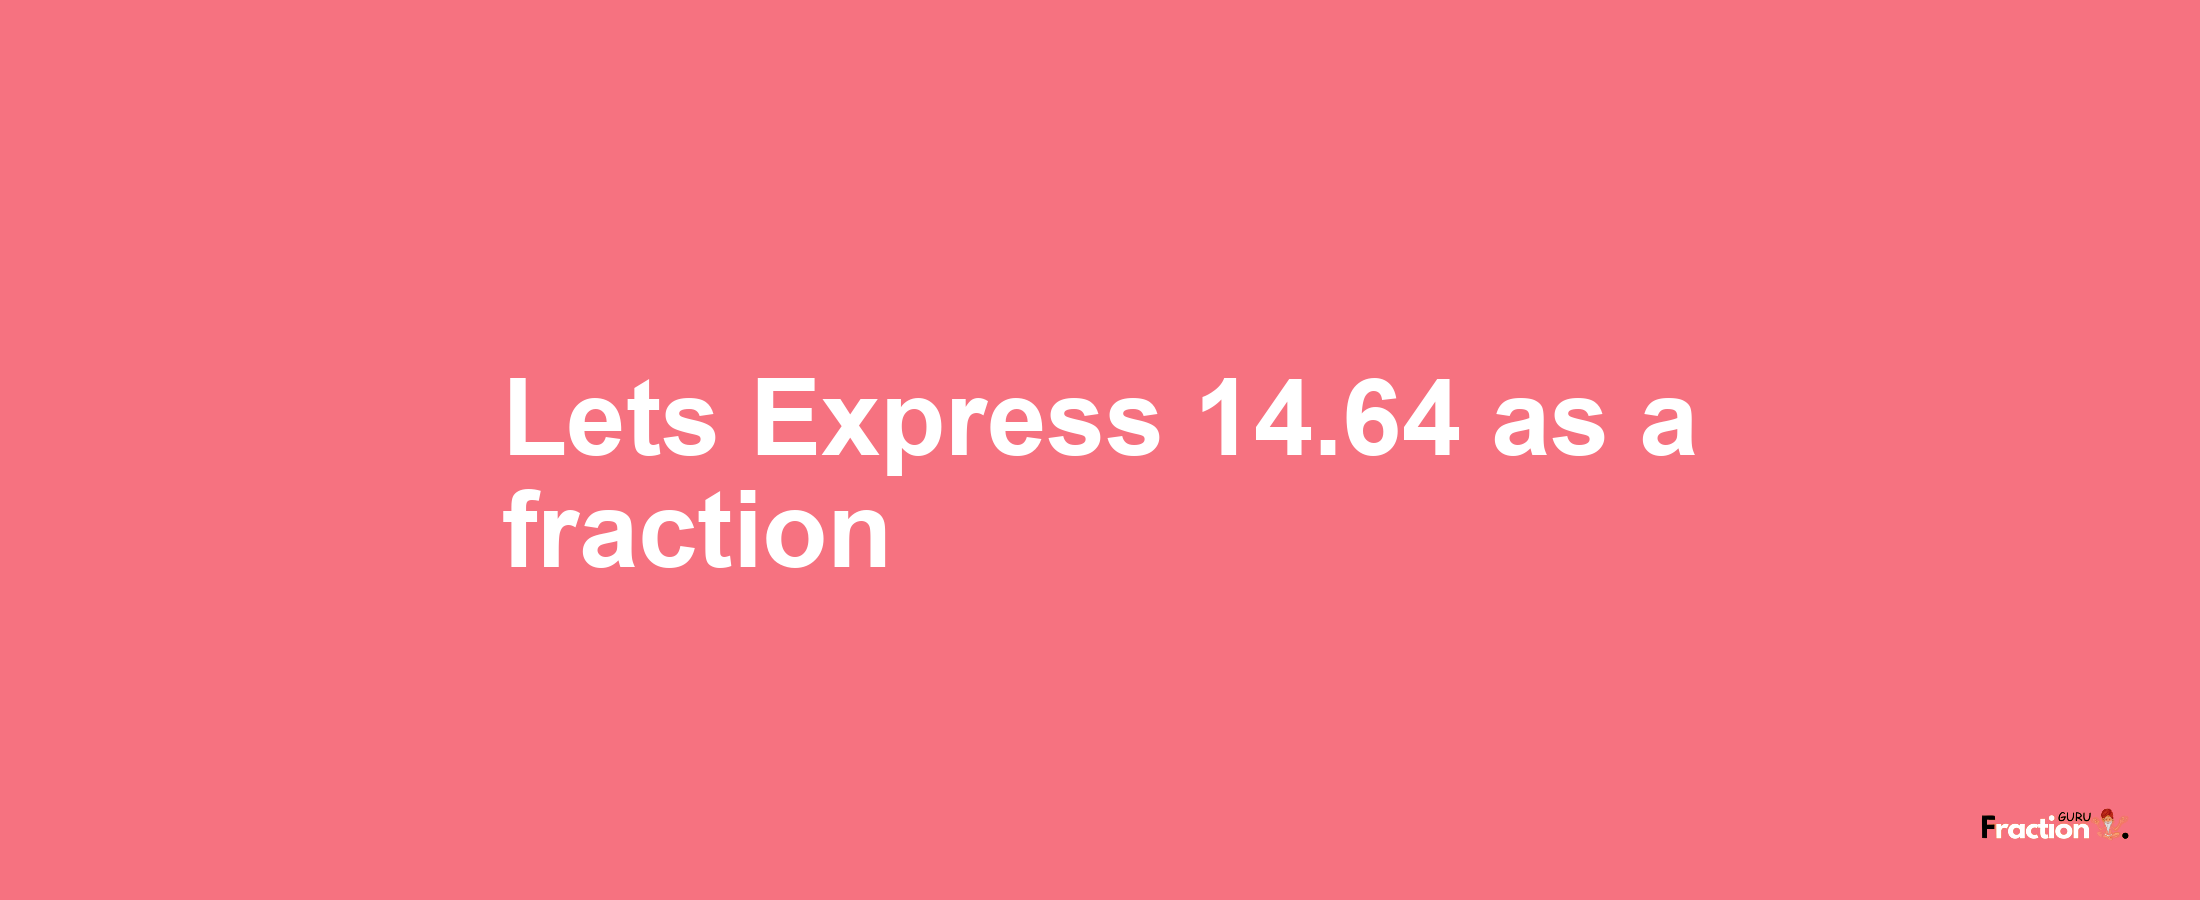 Lets Express 14.64 as afraction